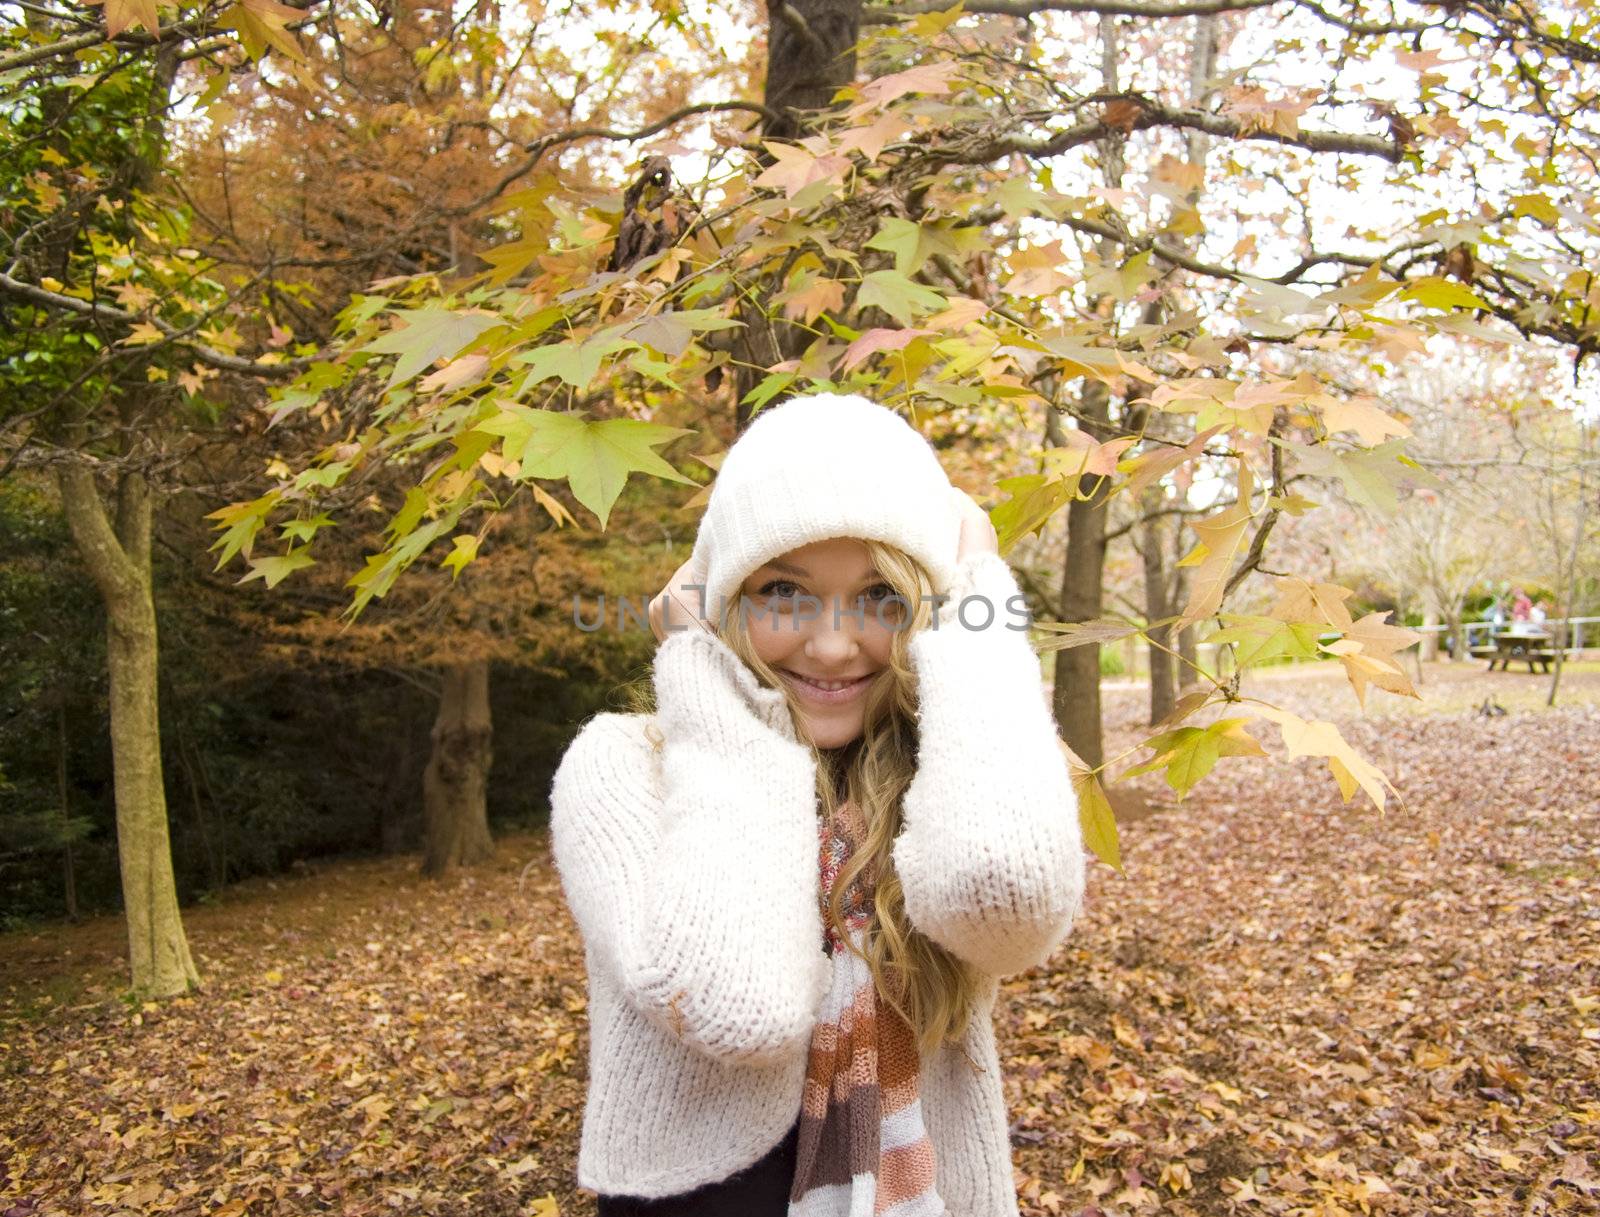 Young girl playing in the Autumn fall leaves